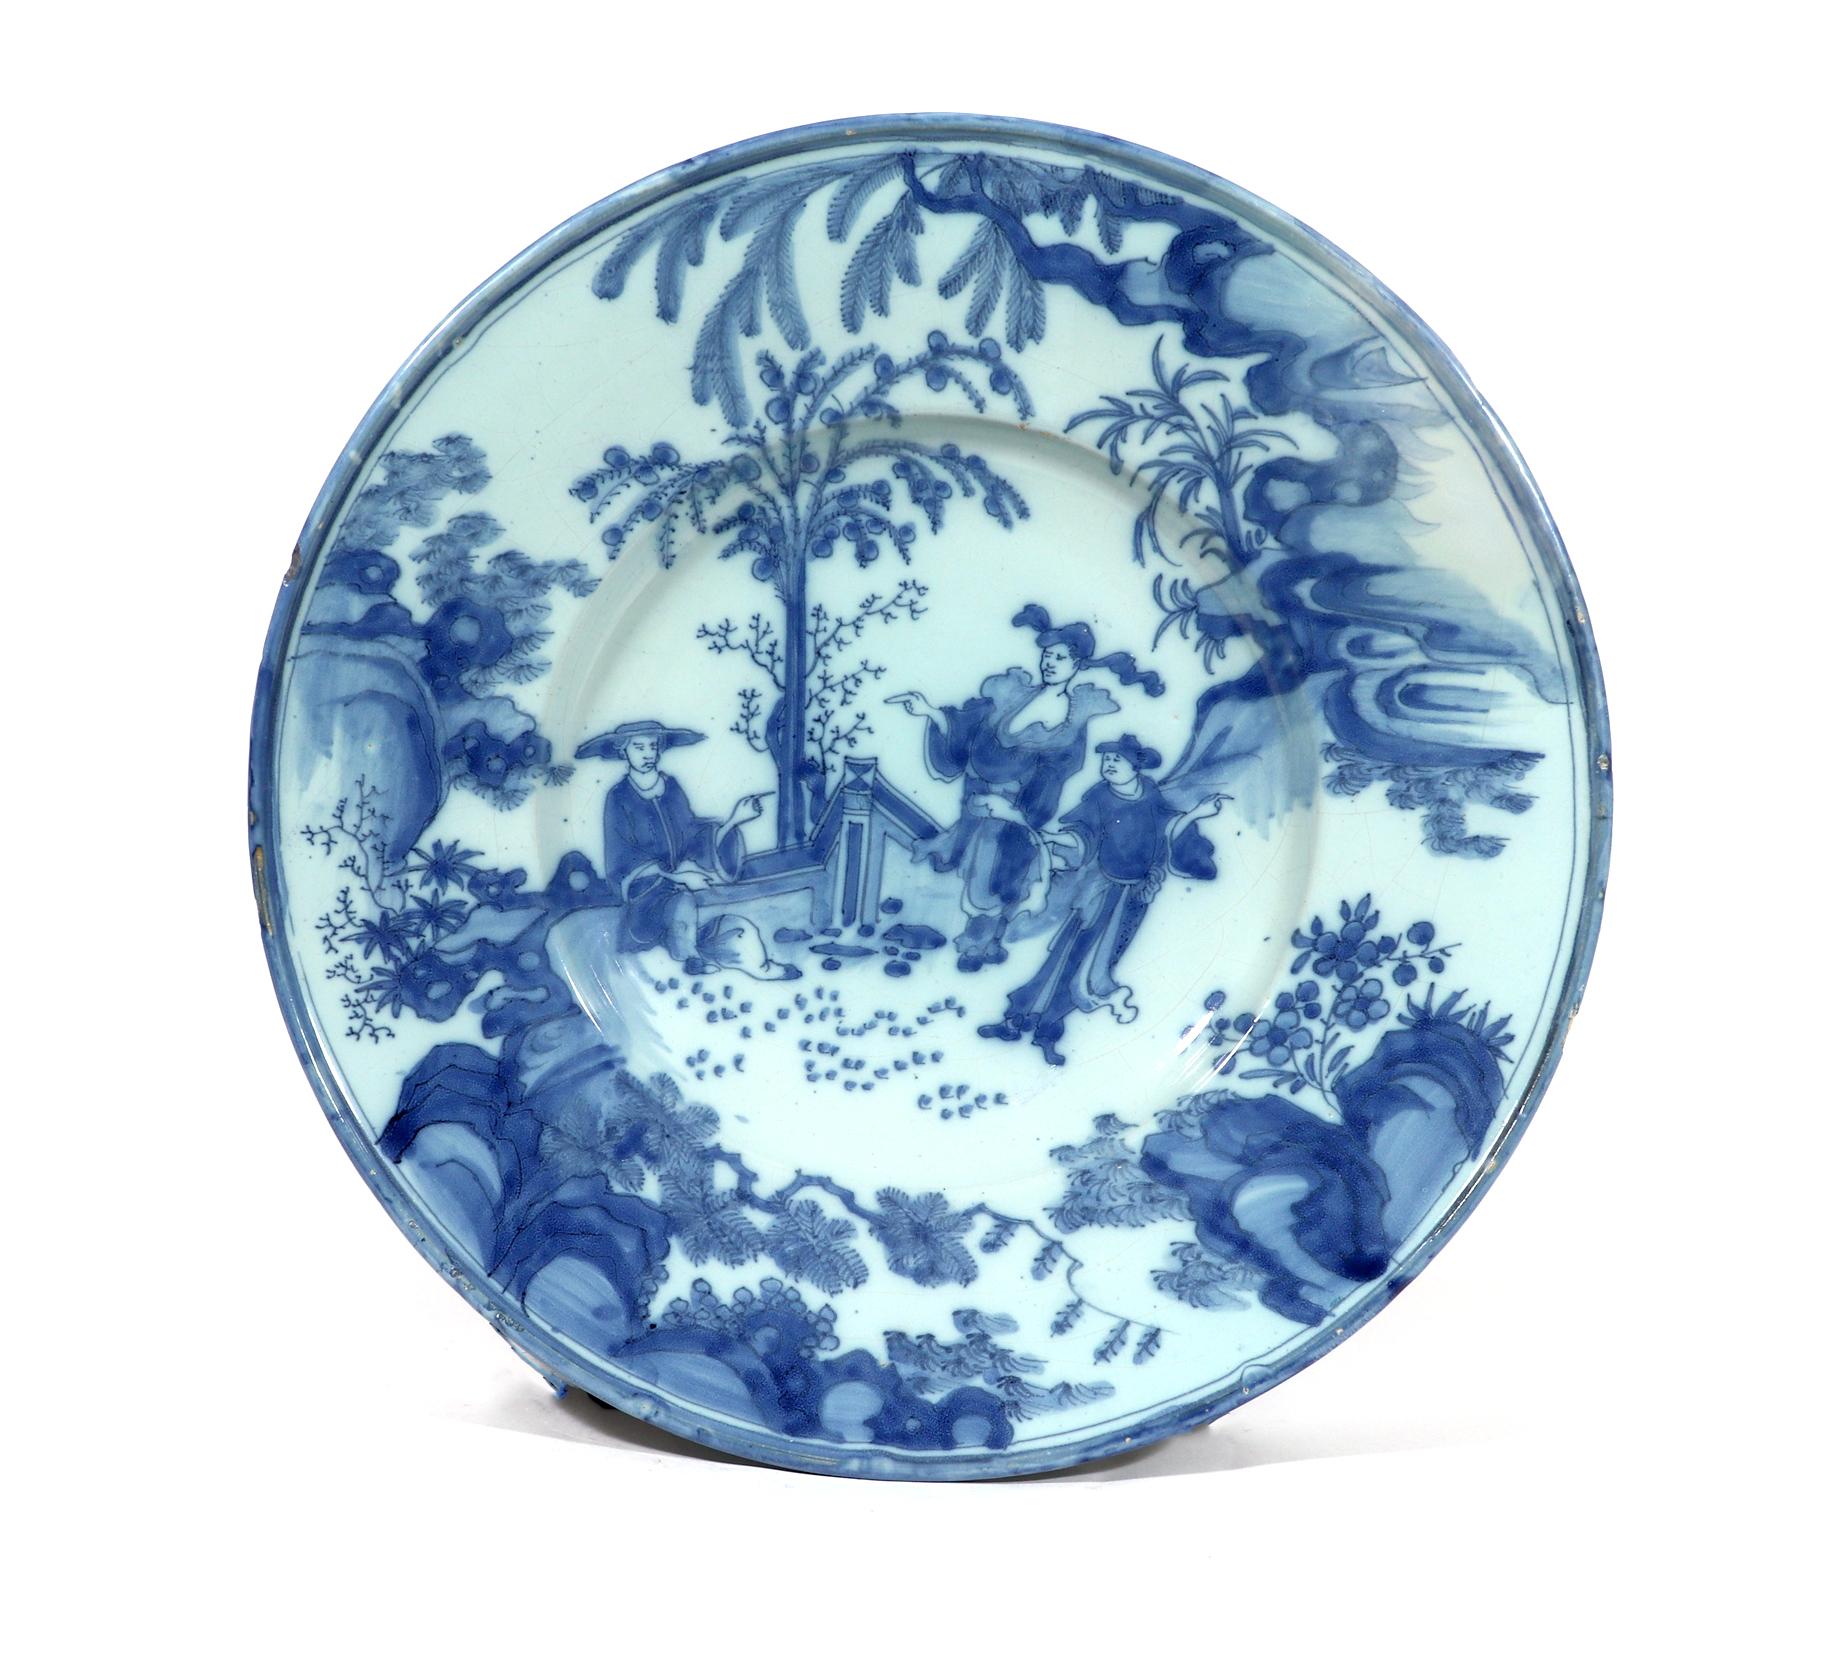 Dutch Delft large underglaze blue chinoiserie dish,
circa 1660-1680.

The large circular Dutch Delft chinoiserie dish, after the Chinese transition period blue & white, is painted with large Chinese figures in the central well surrounded by a